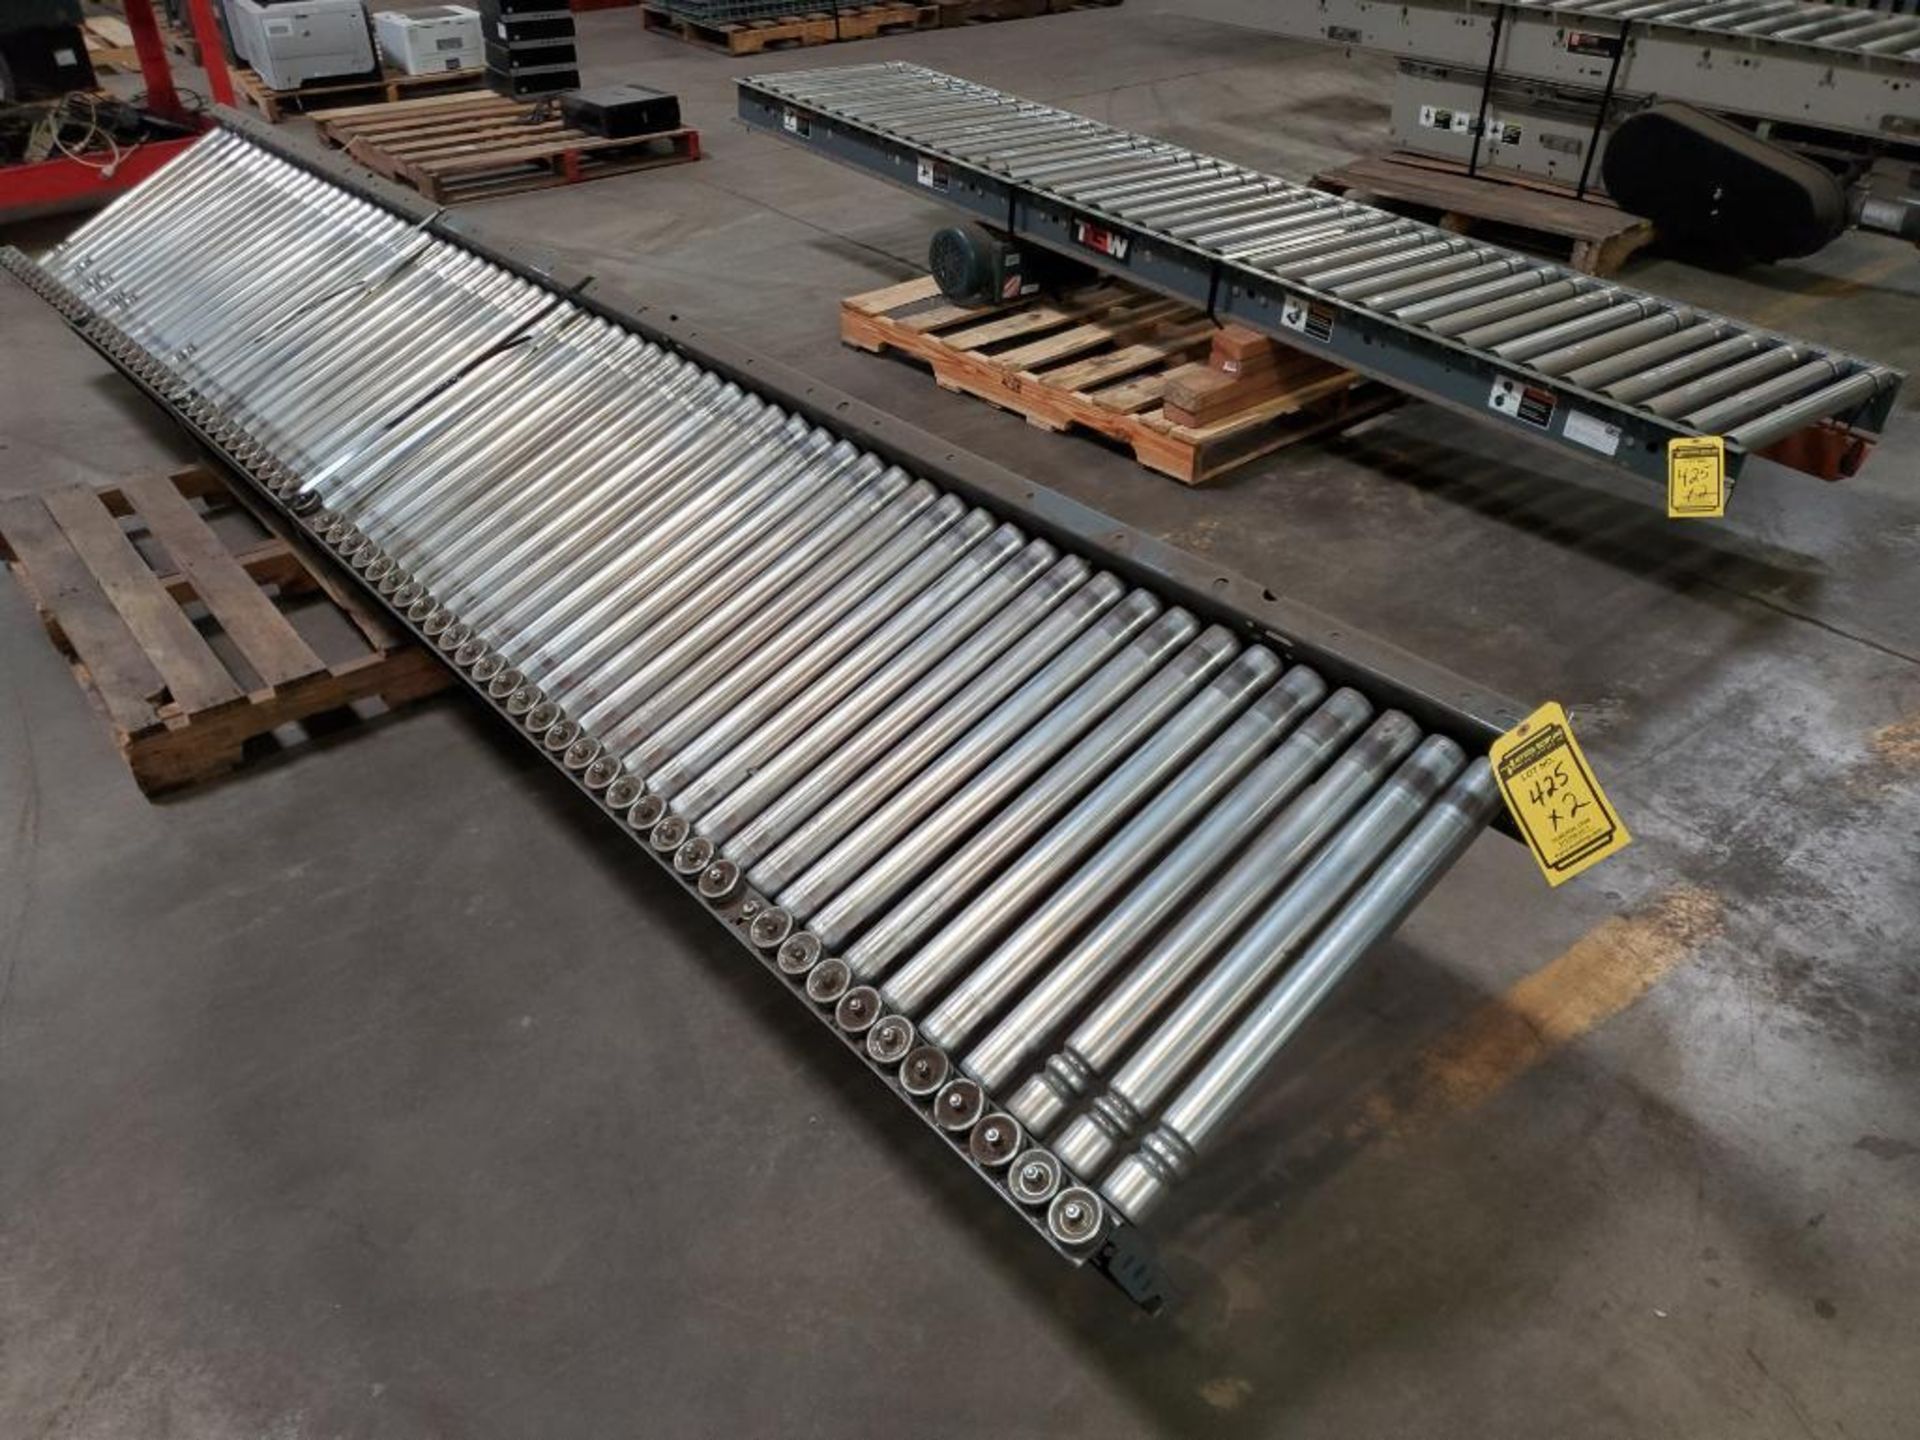 (2x) TGW Motor Conveyor, 21-1/2" Rollers ($20 Loading fee will be added to buyers invoice)